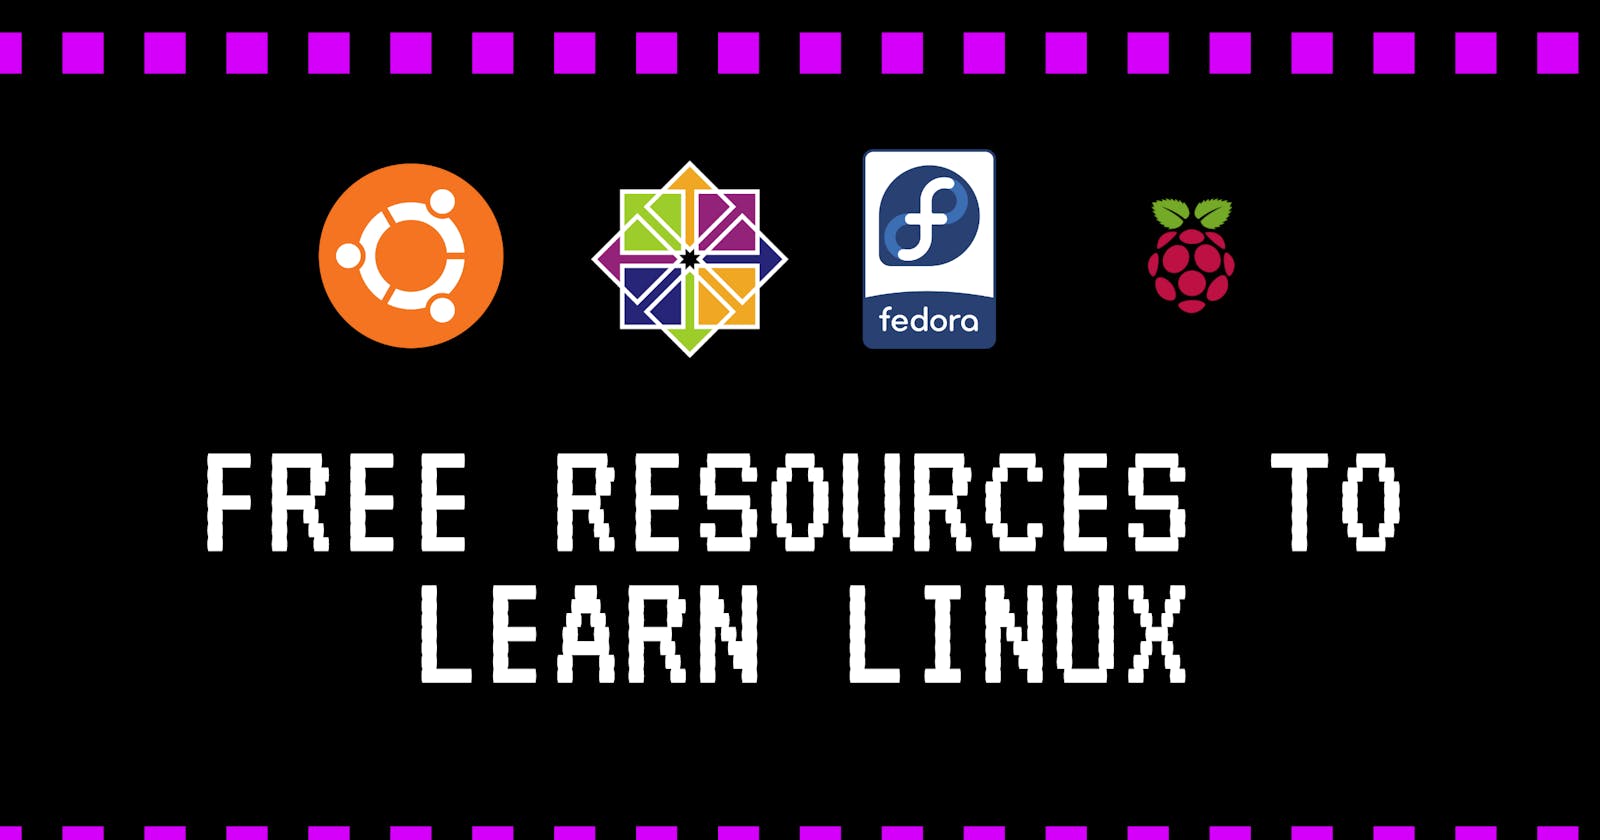 What is Linux and why you should learn it? Free resource included!